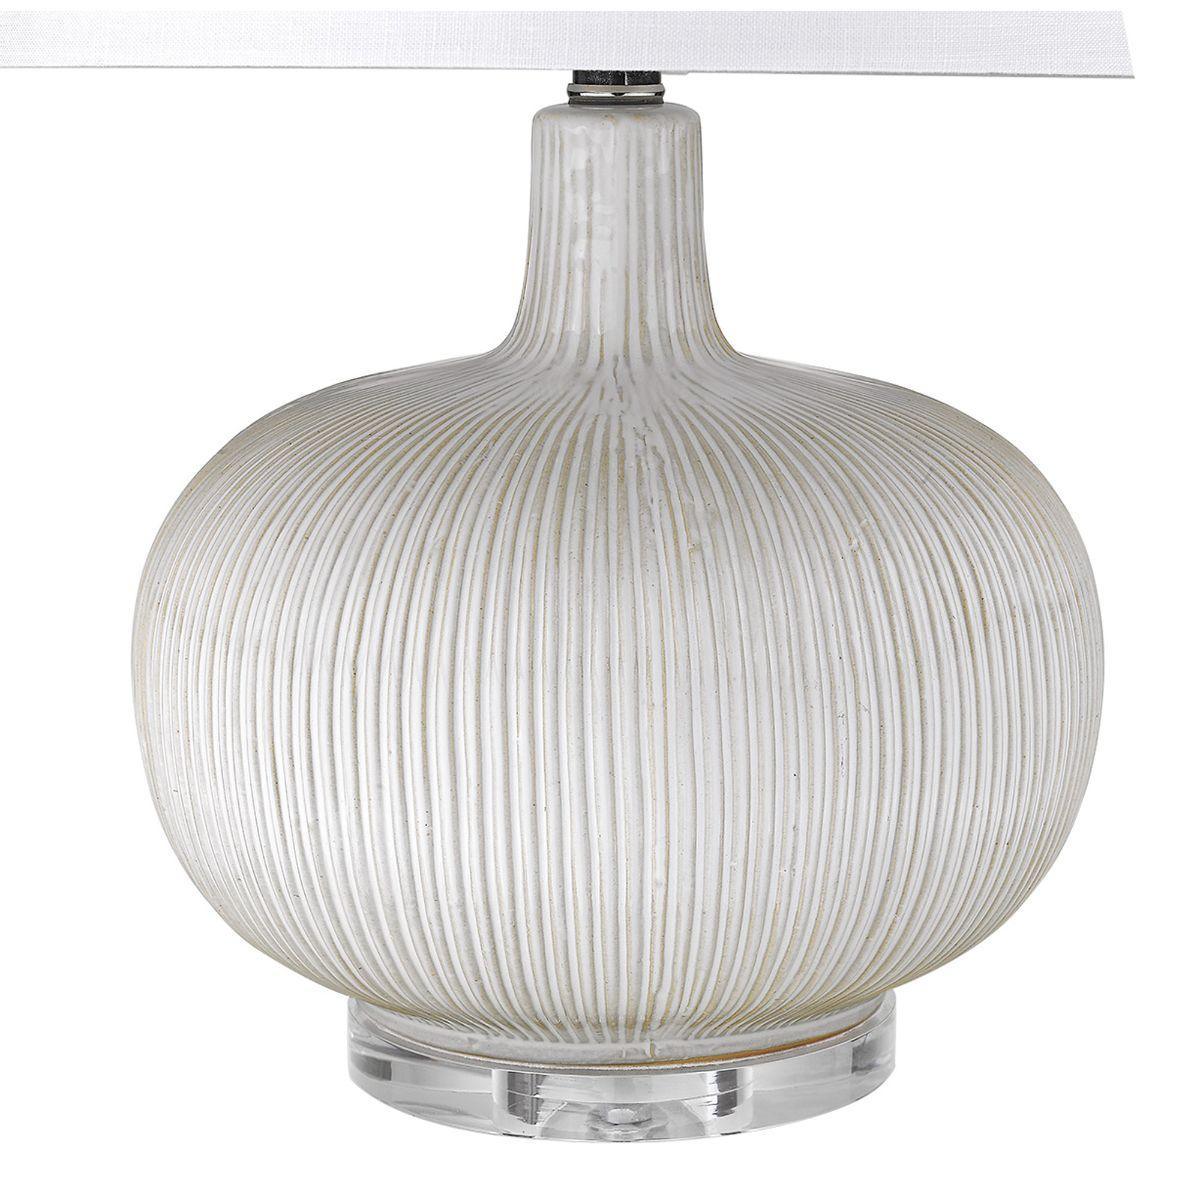 Trend Home 1 Light Table Lamp Ceramic Body and Polished Nickel Accents